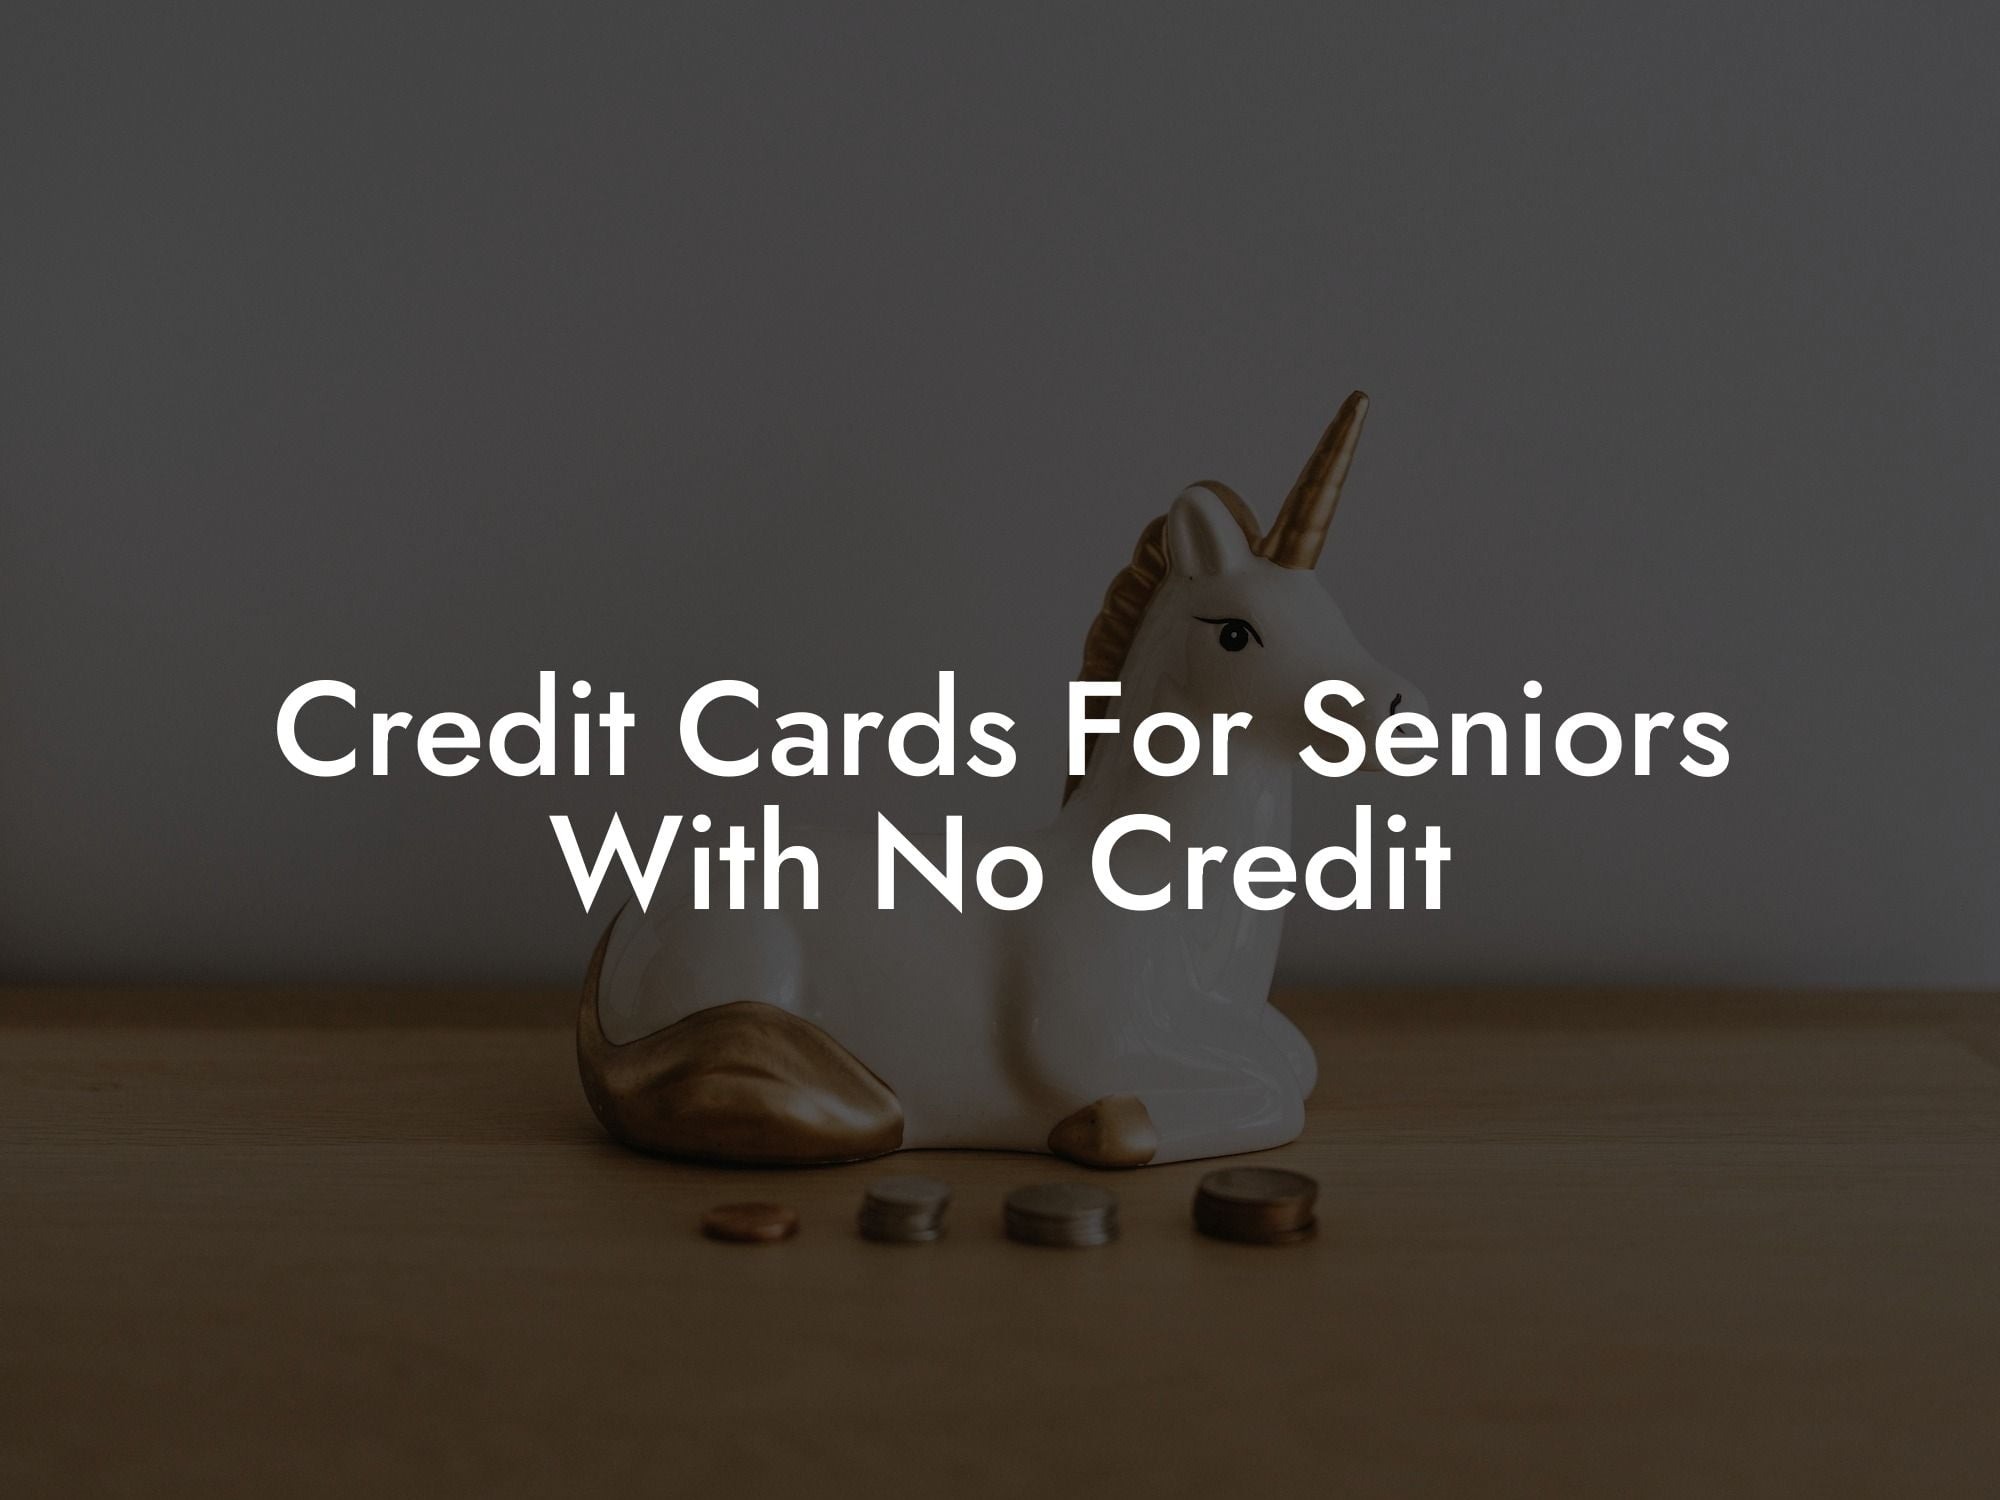 Credit Cards For Seniors With No Credit